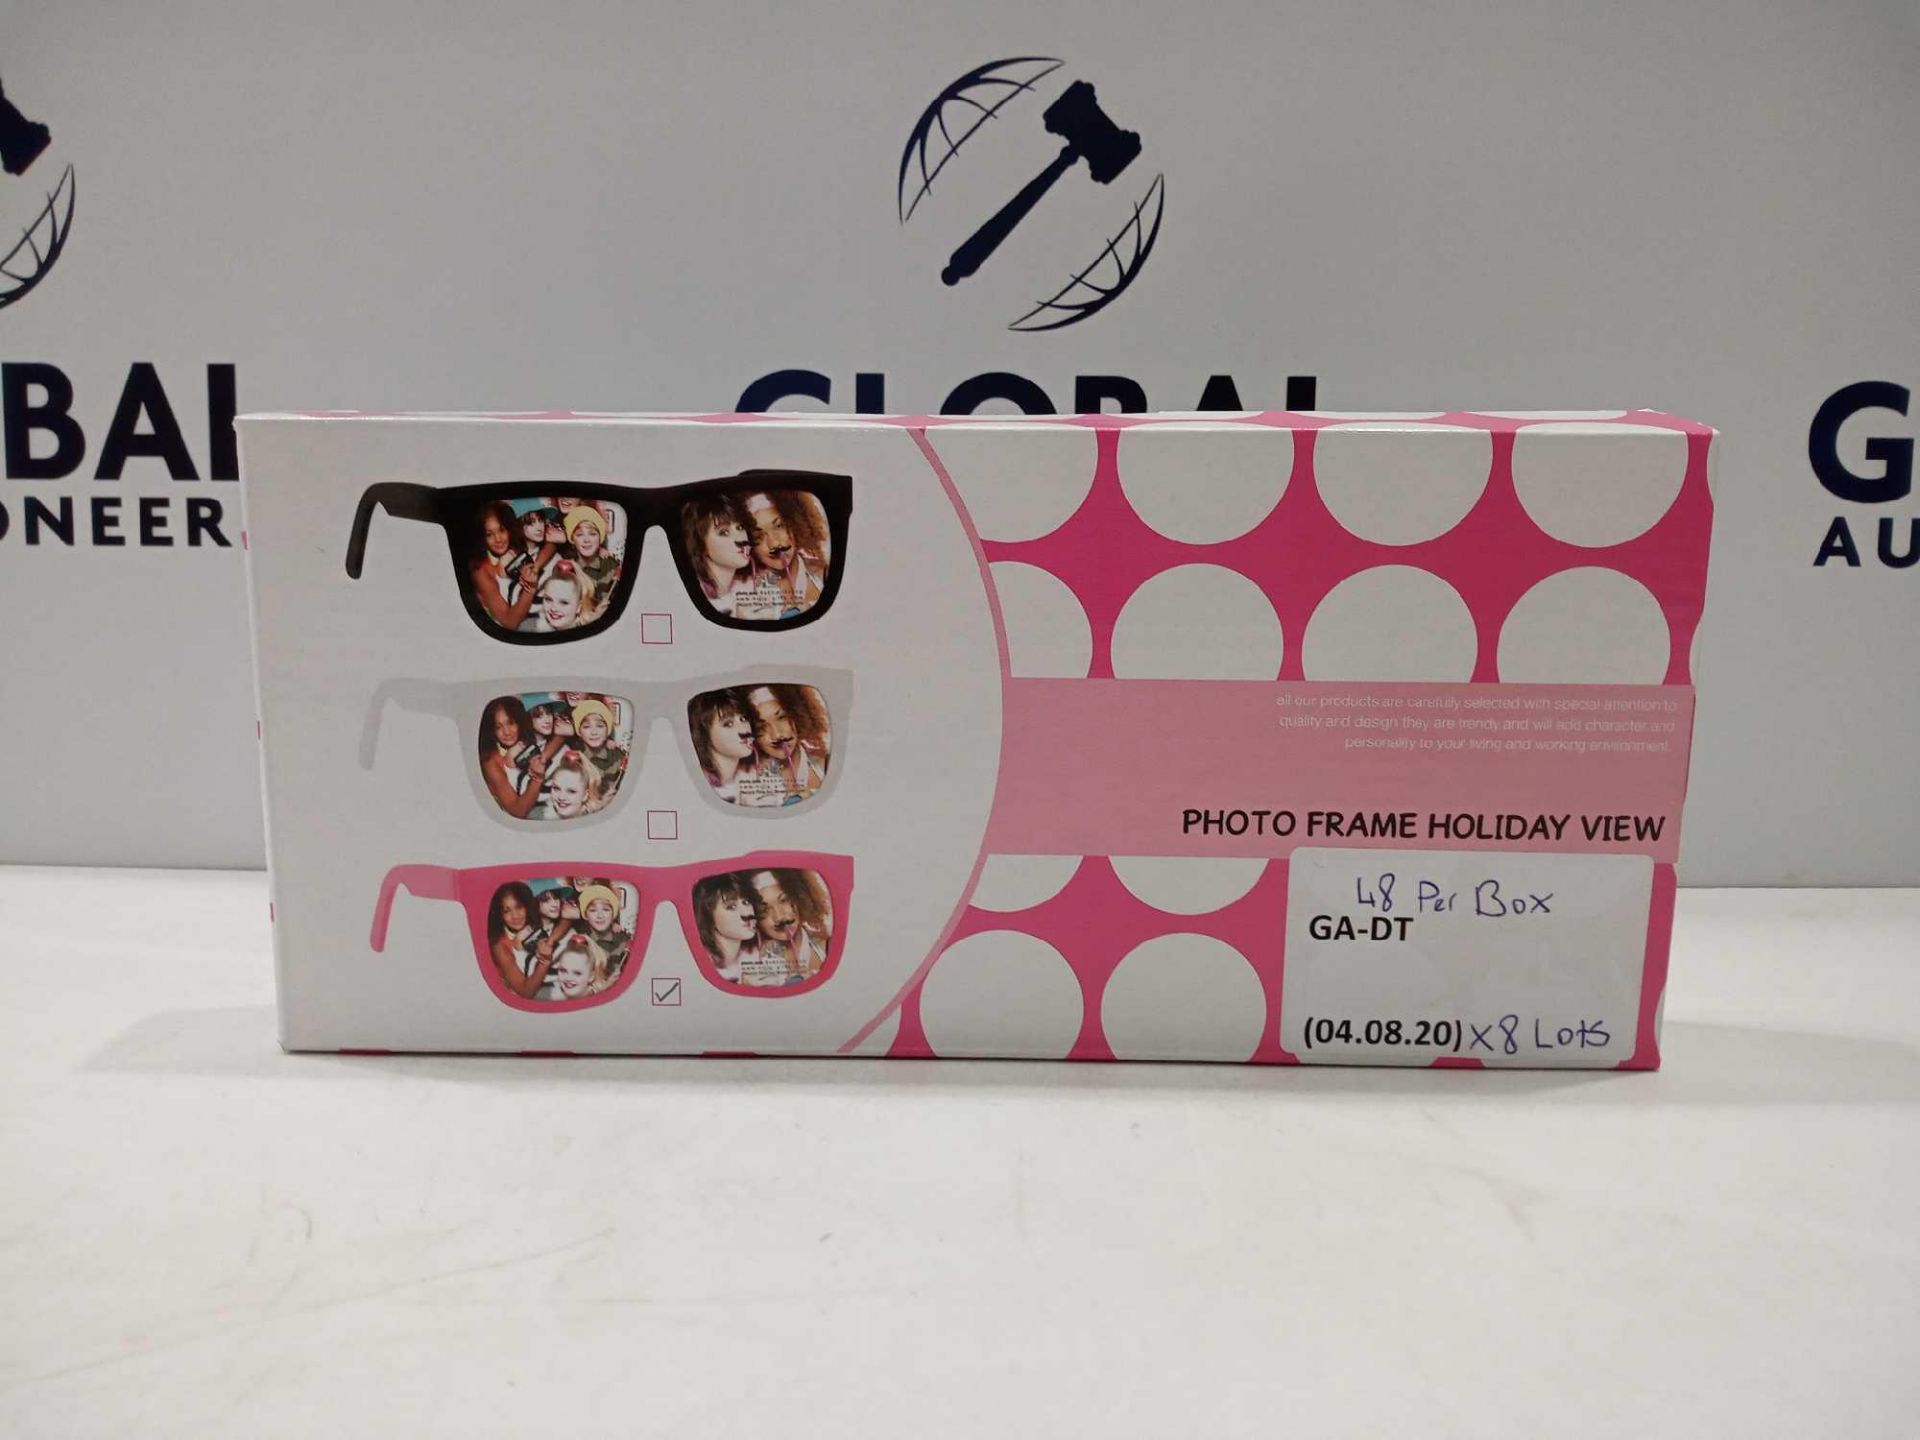 Combined Rrp £200 Box To Contain 50 Boxed Photo Frame Holiday View Glasses